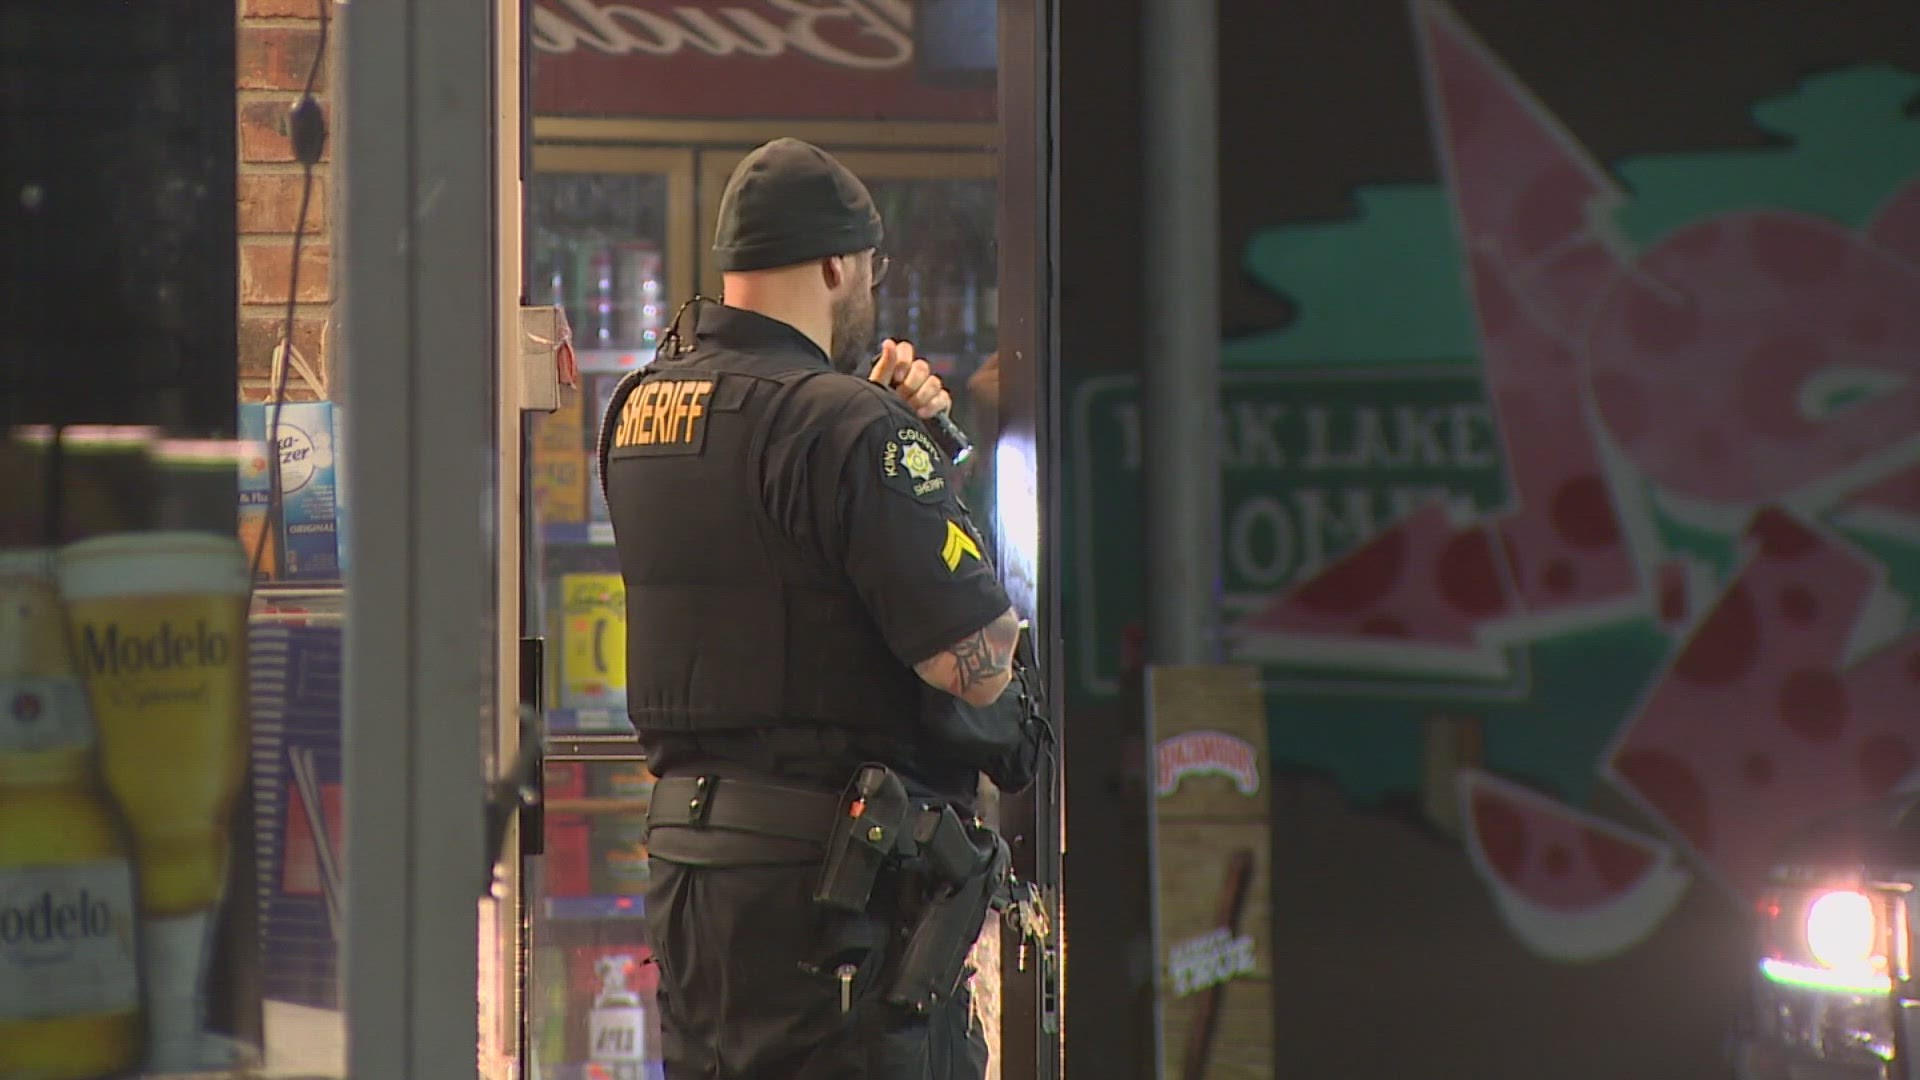 The clerk at a convenience store in Burien says suspects fired a shot at him during the incident.